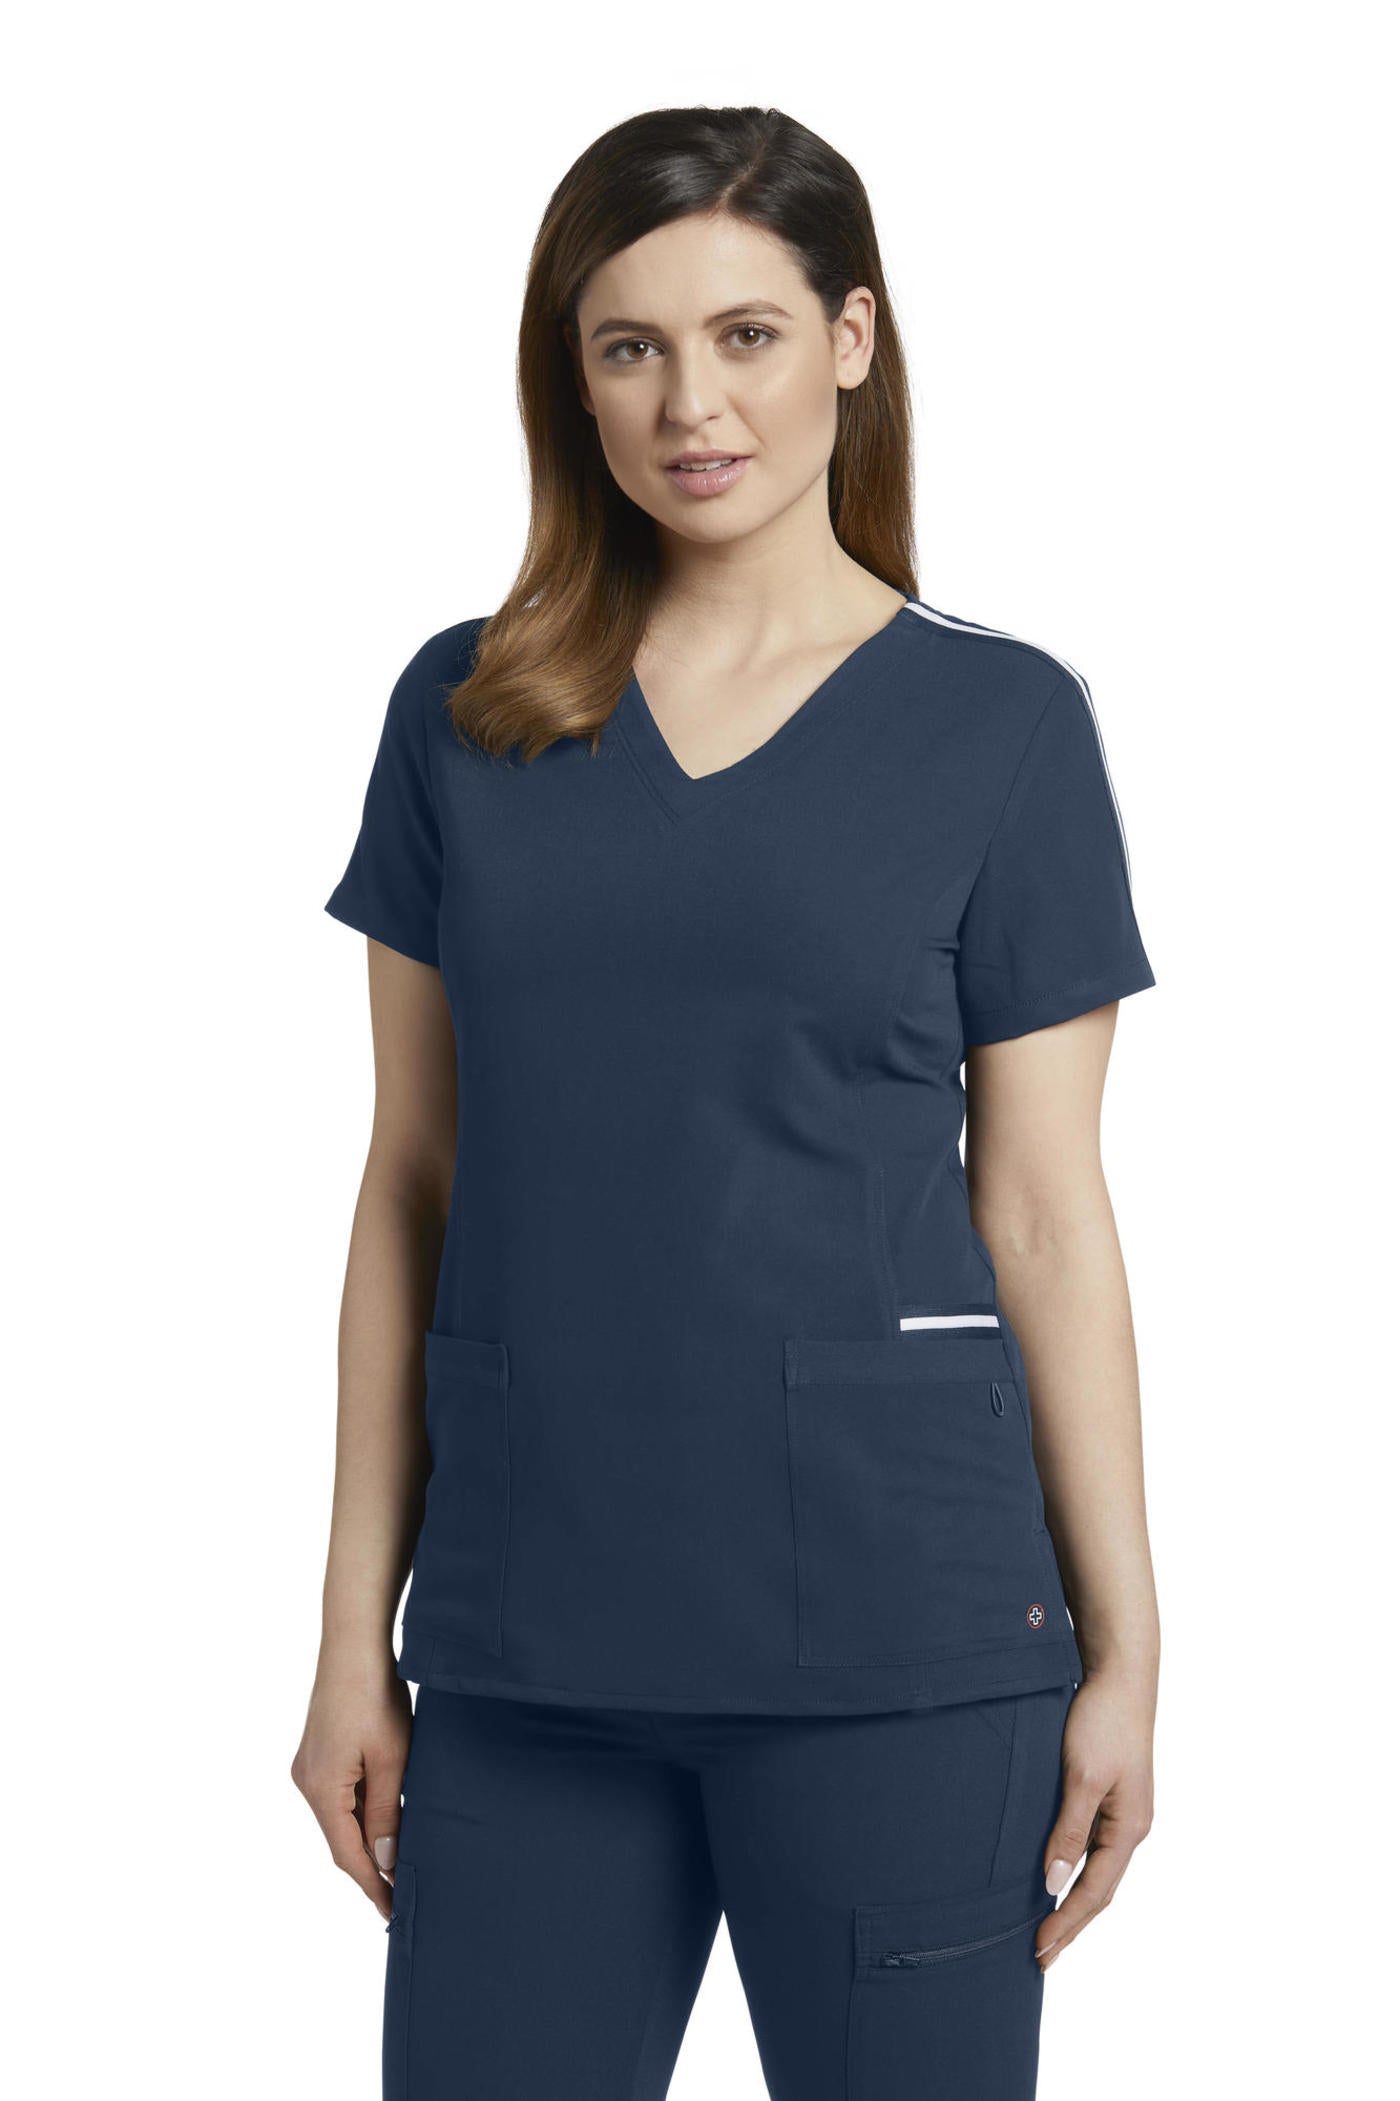 754 VTess Women's Scrub Top with Contrast Detail *While Quantities Last*